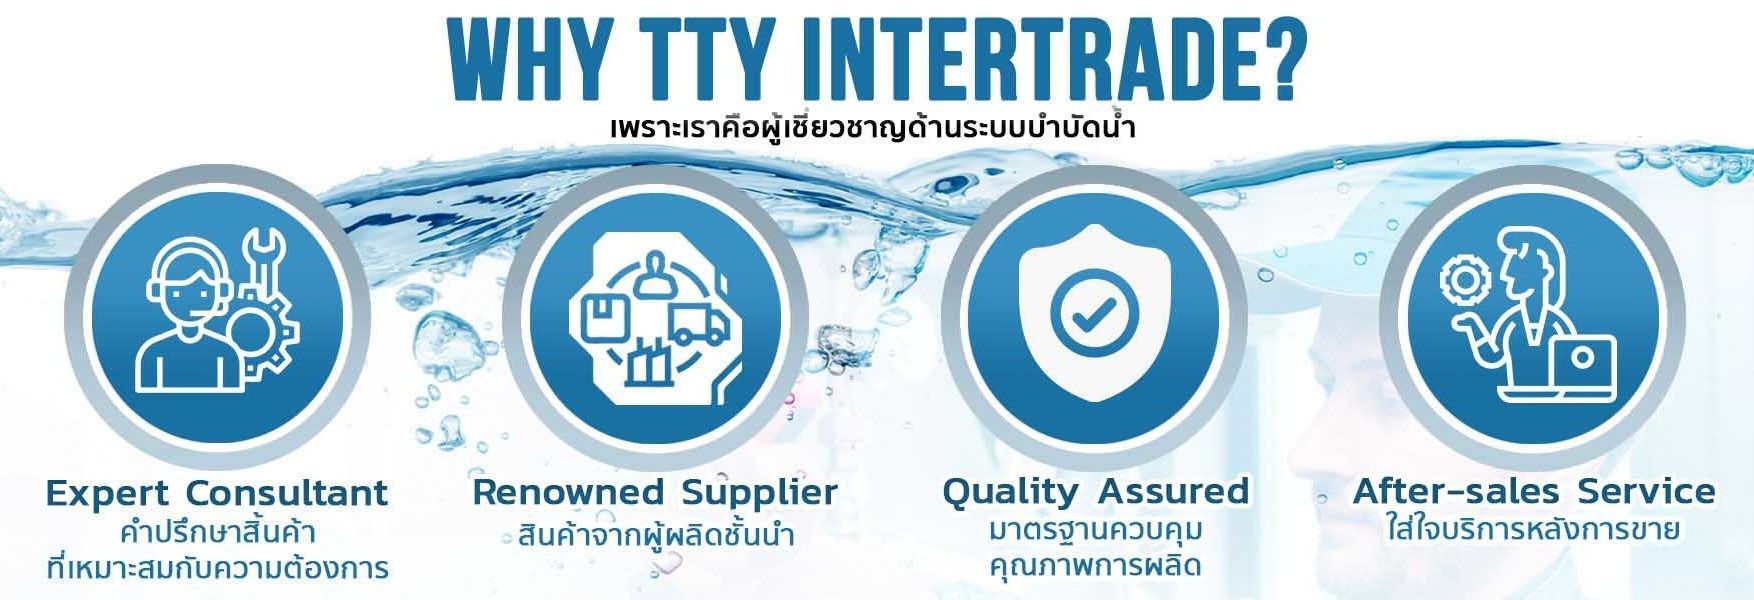 Over 30 years of experience, TTY Intertrade specializes in supplying best-in-class water treatment e